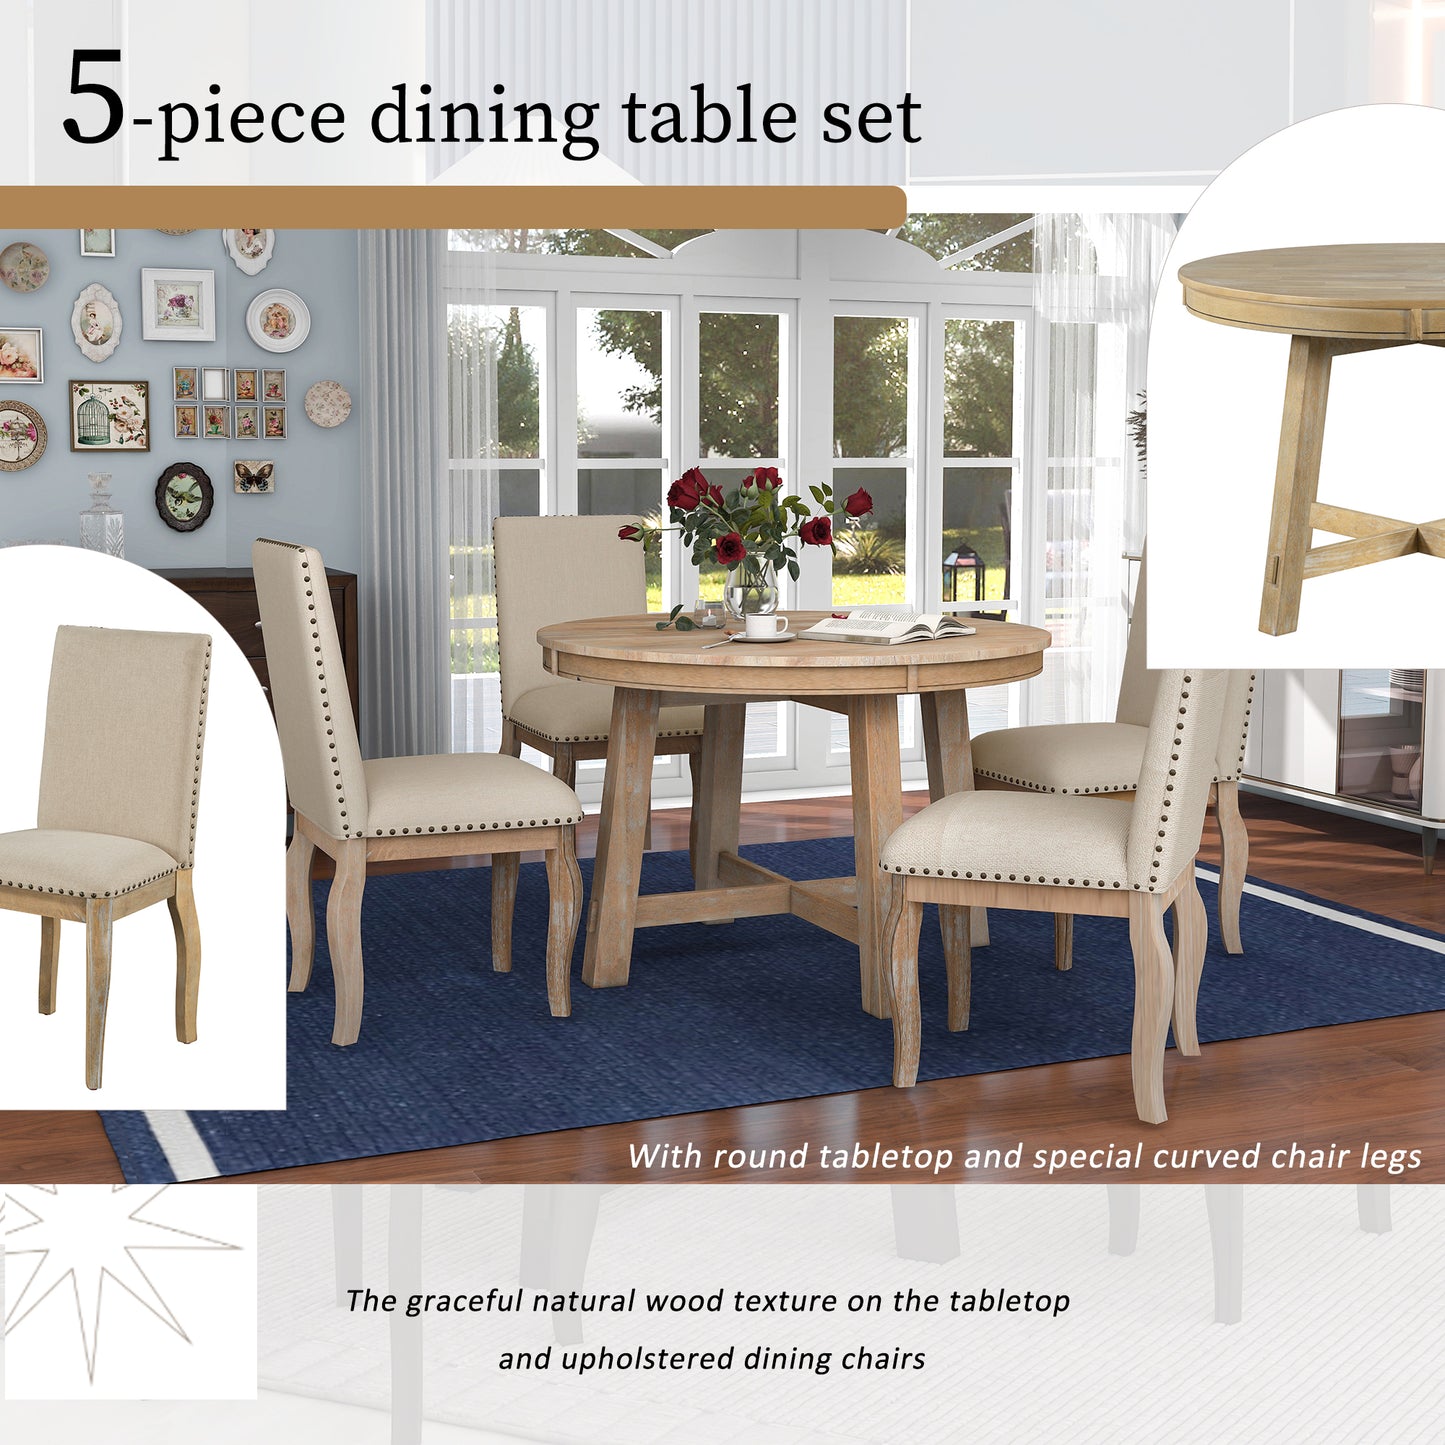 TREXM 5-Piece Farmhouse Dining Table Set Wood Round Extendable Dining Table and 4 Upholstered Dining Chairs (Natural Wood Wash)